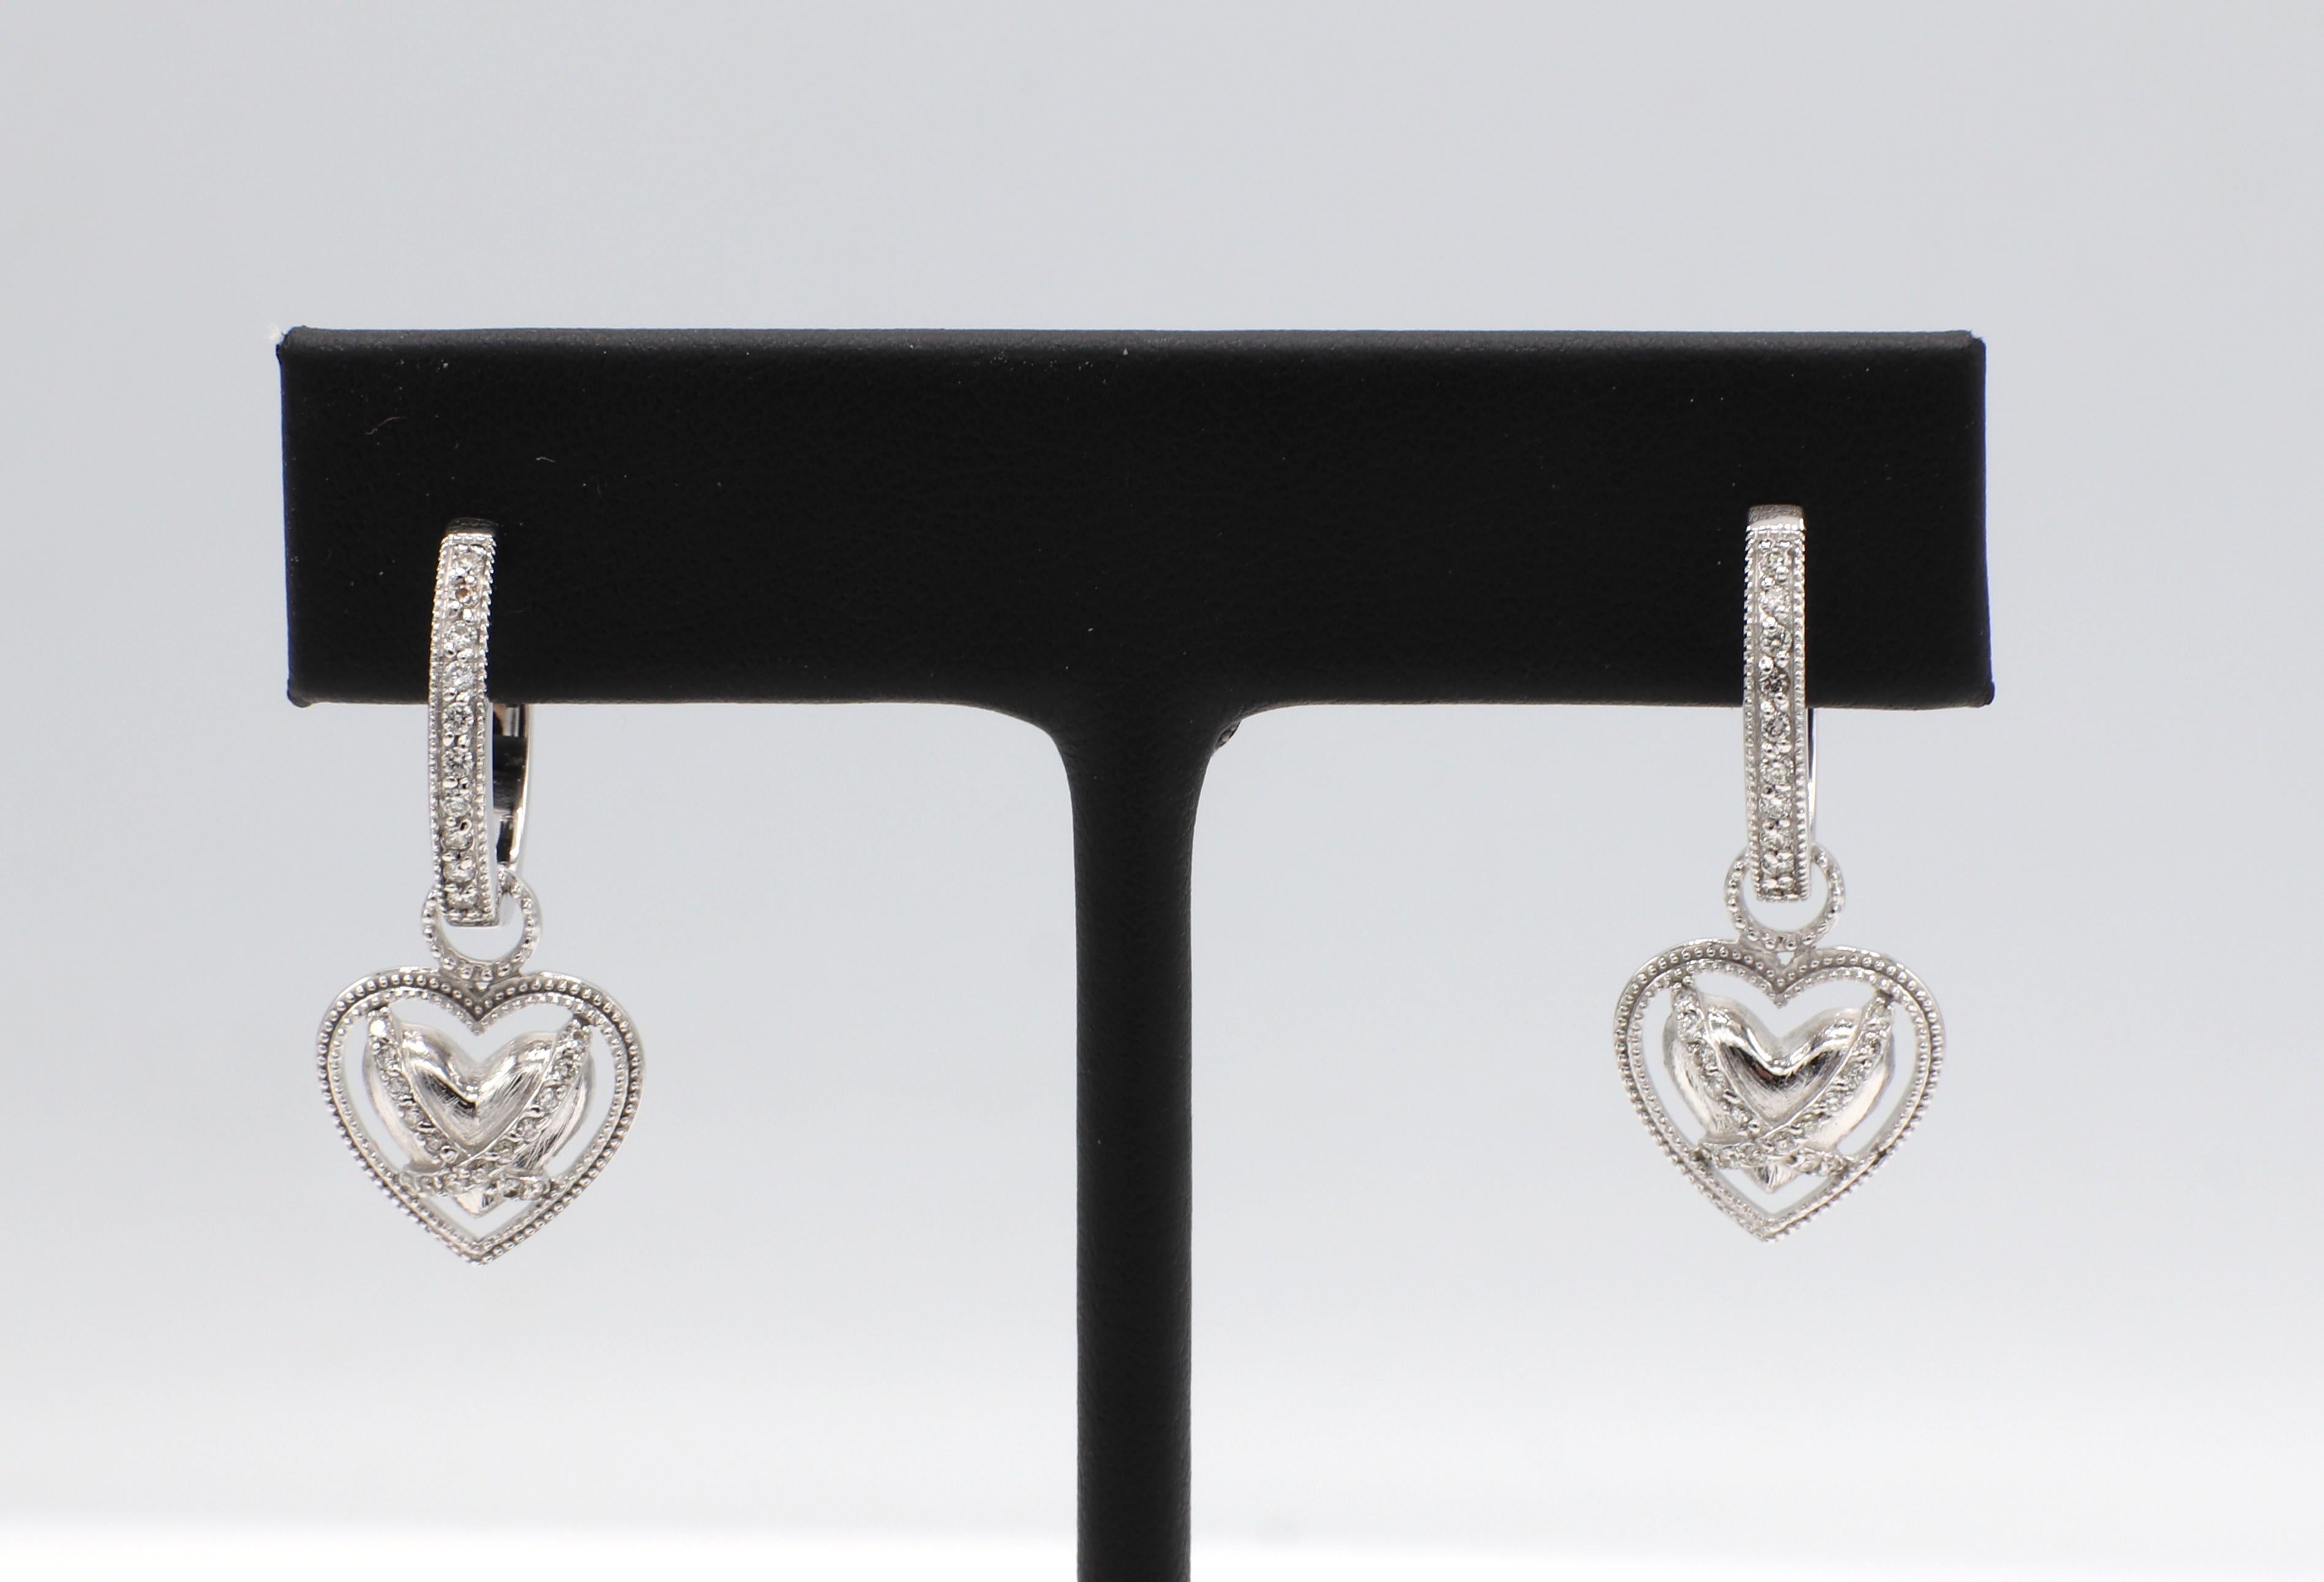 Jude Frances 18 Karat White Gold Hoop With Detachable Heart Charm Dangle Earrings 
Metal: 18k white gold
Weight: 8.21 grams
Diamonds: Approx. .25 CTW G VS natural diamonds
Hoops: 17mm diameter
Heart charm: 13 x 12mm (detachable)
Length: 27mm
Signed: